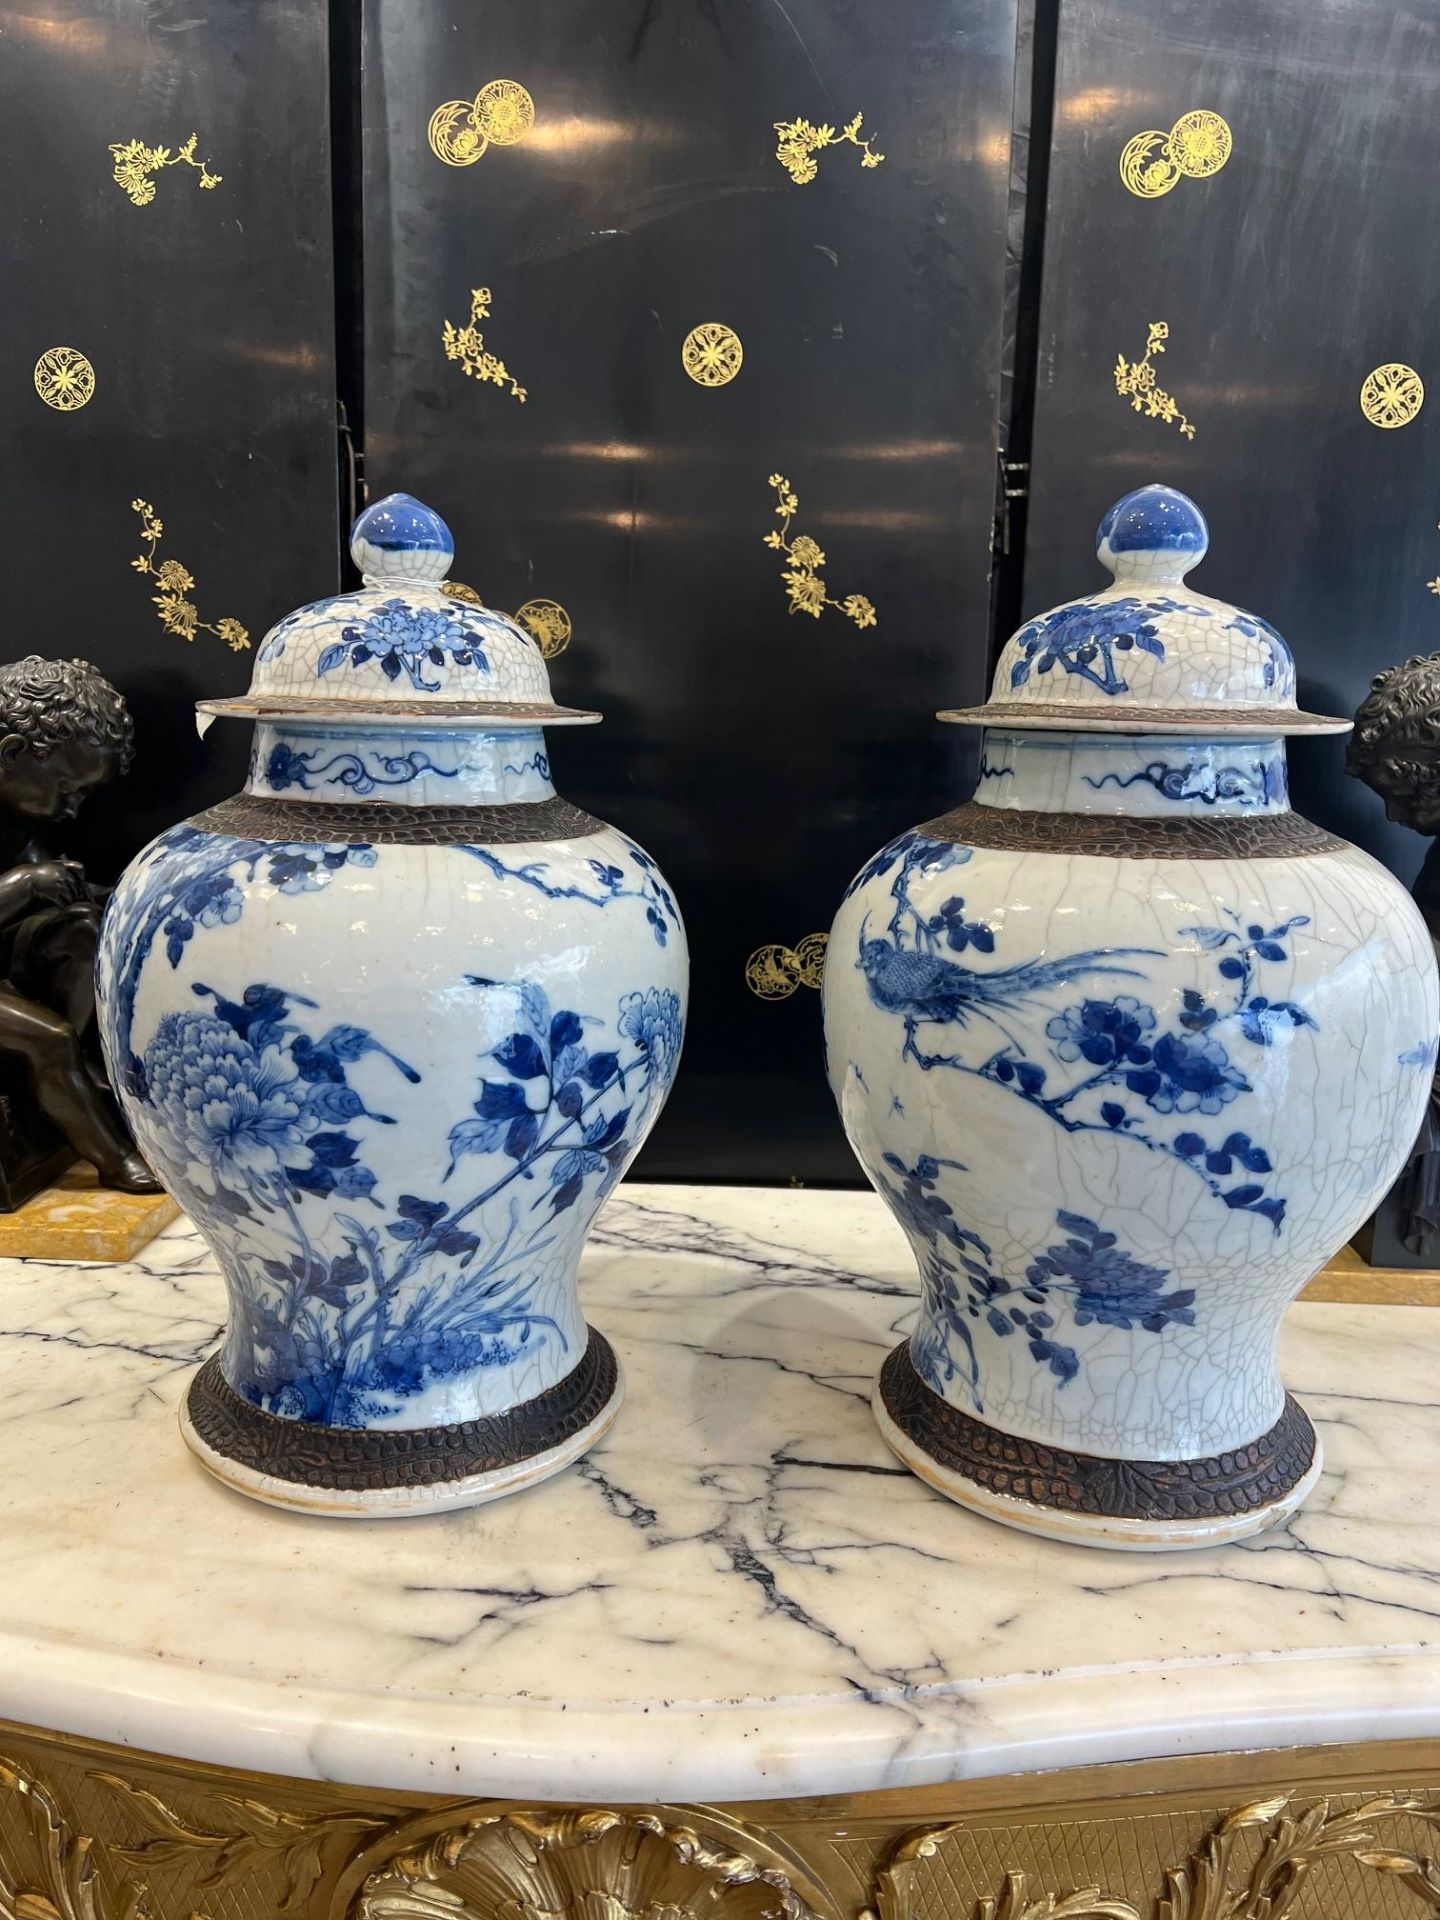 A LARGE PAIR OF 19TH CENTURY CHINESE CRACKLE GLAZED PORCELAIN VASES AND COVERS - Image 4 of 10